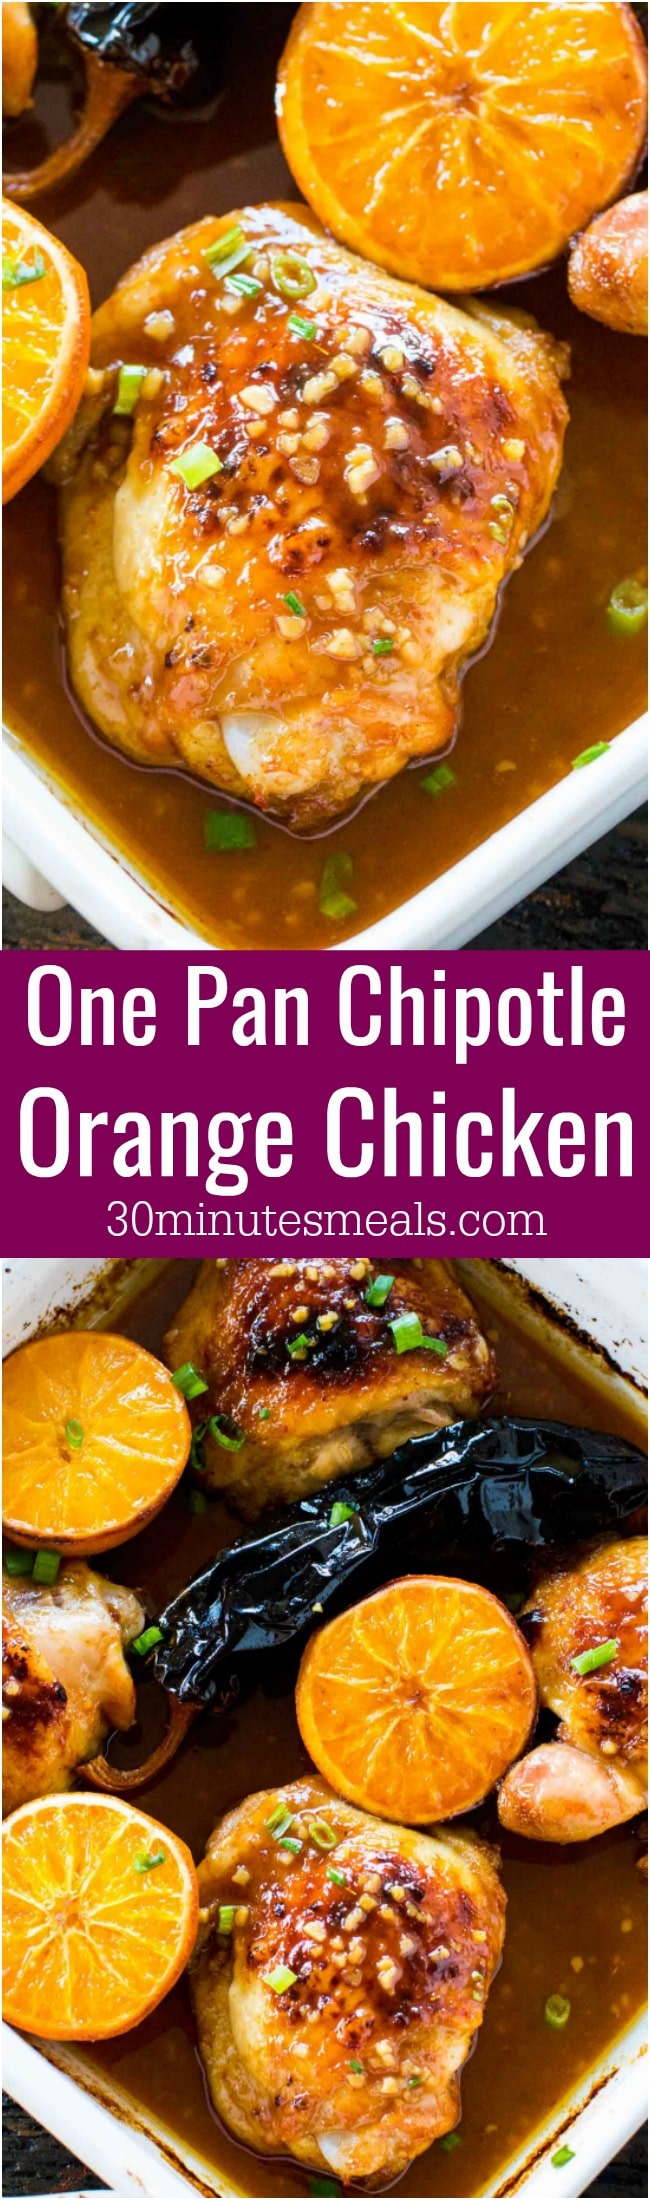 Chipotle Orange Chicken is sweet, spicy, crispy on the outside and tender on the inside. Also, easily made in one pan in just 30 minutes.